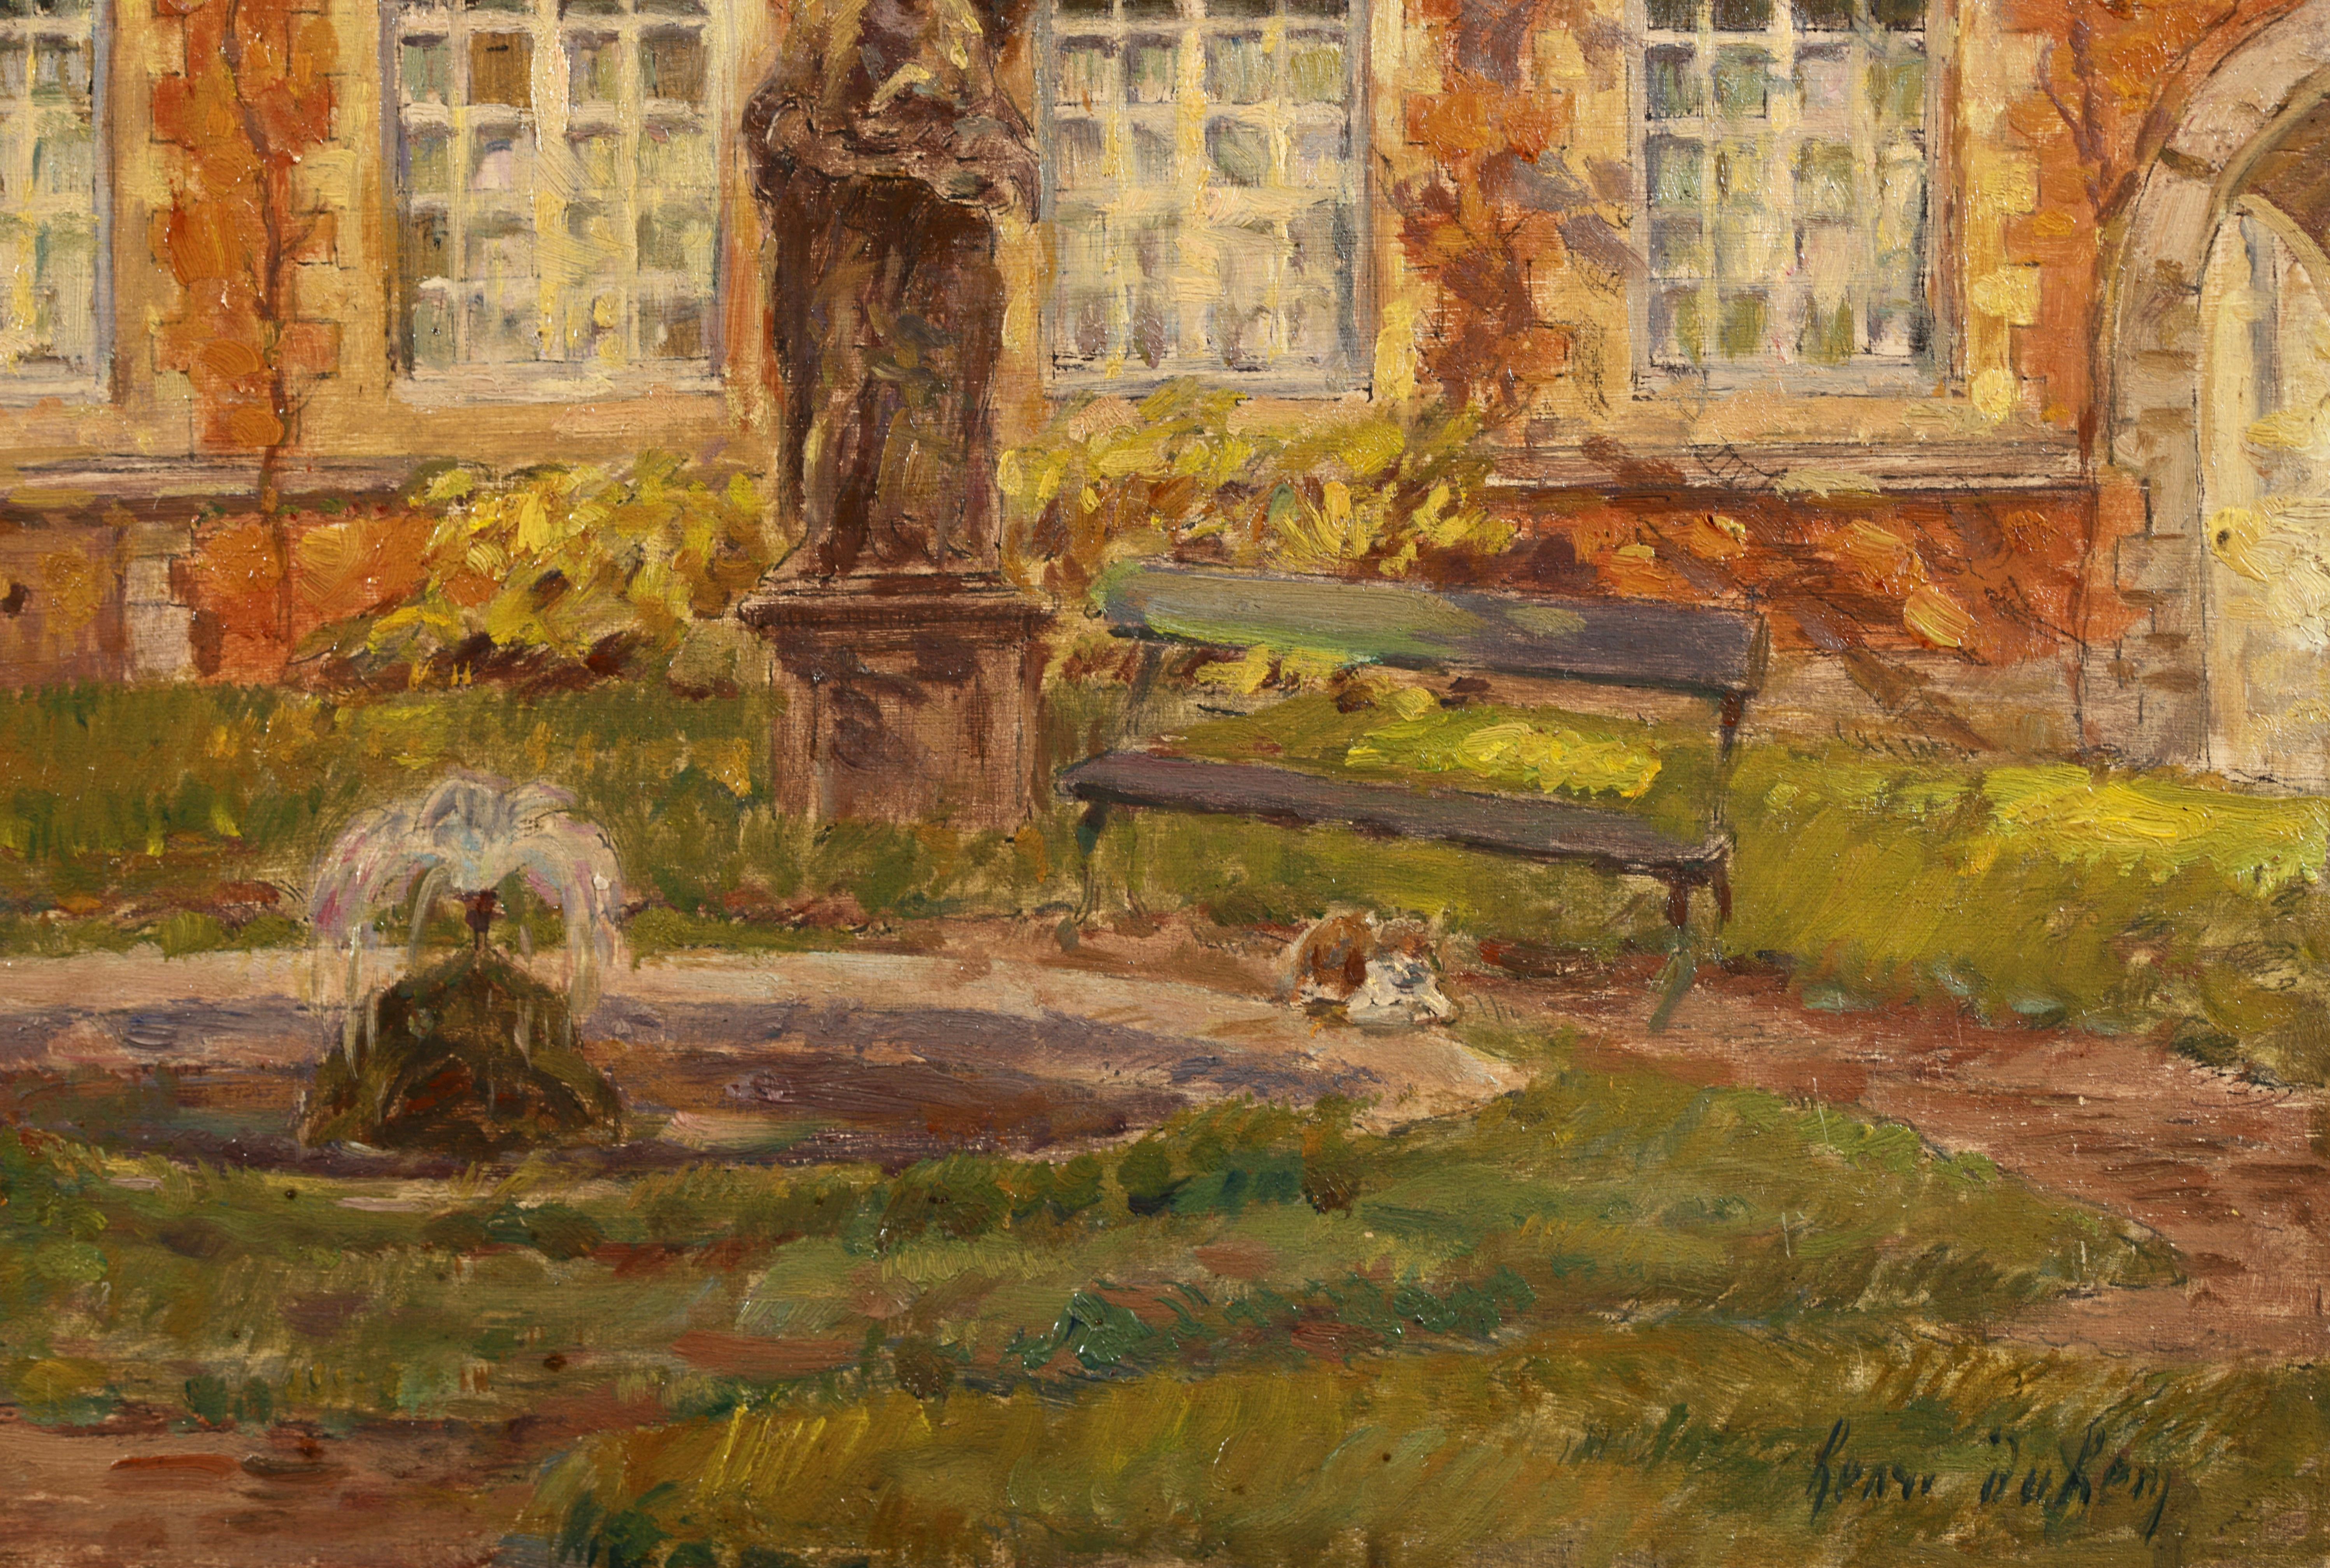 Signed and dated impressionist oil on panel by French painter Henri Duhem. The work depicts a the artist's garden. A statue stands beside a water fountain while a cat rests in the shade on the grass beside a garden bench. The large white sash